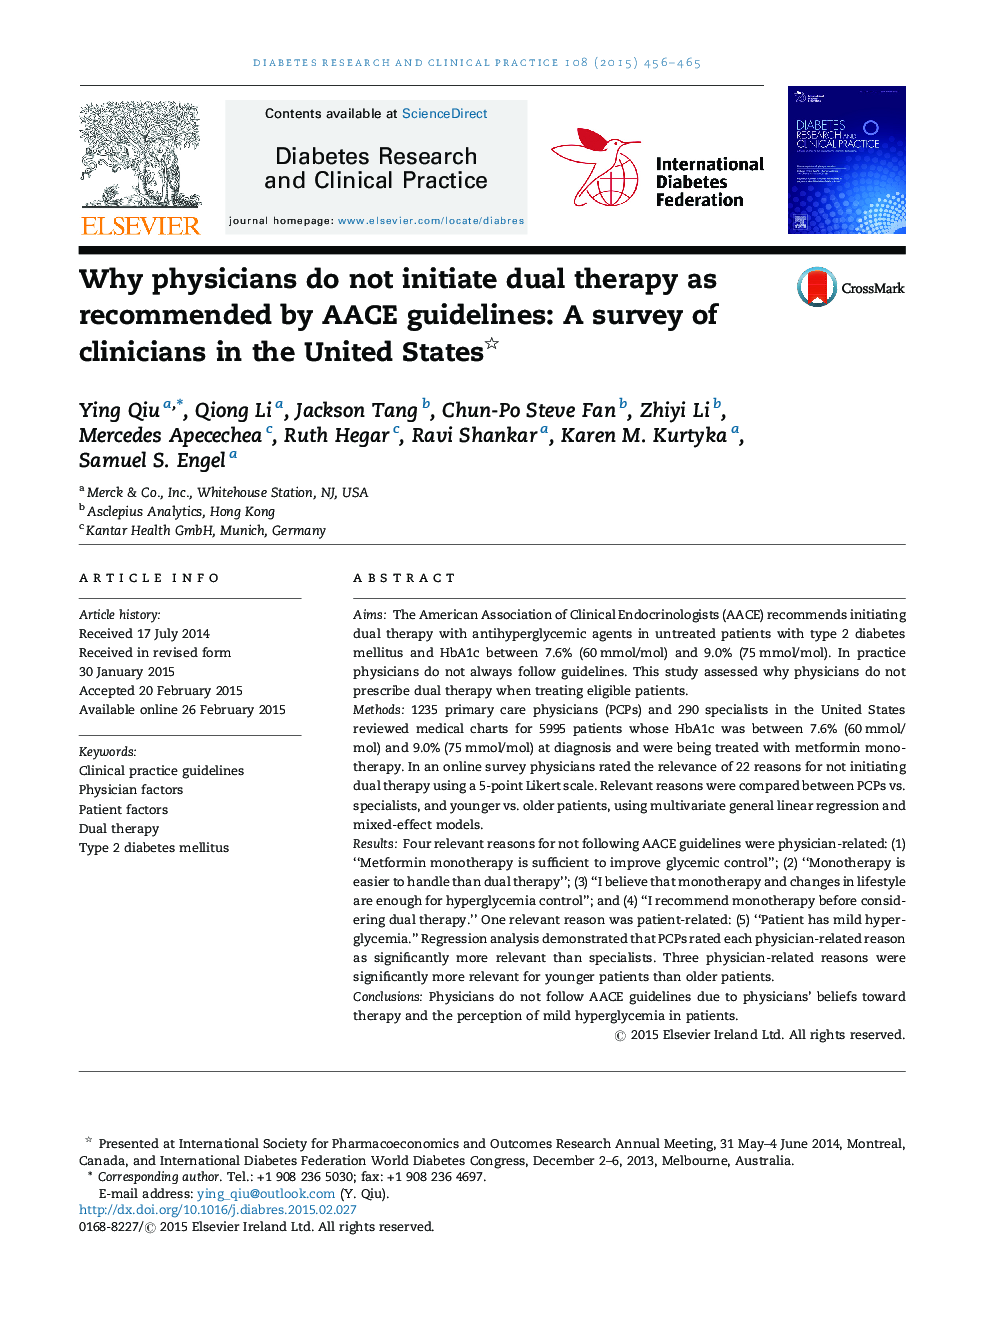 Why physicians do not initiate dual therapy as recommended by AACE guidelines: A survey of clinicians in the United States